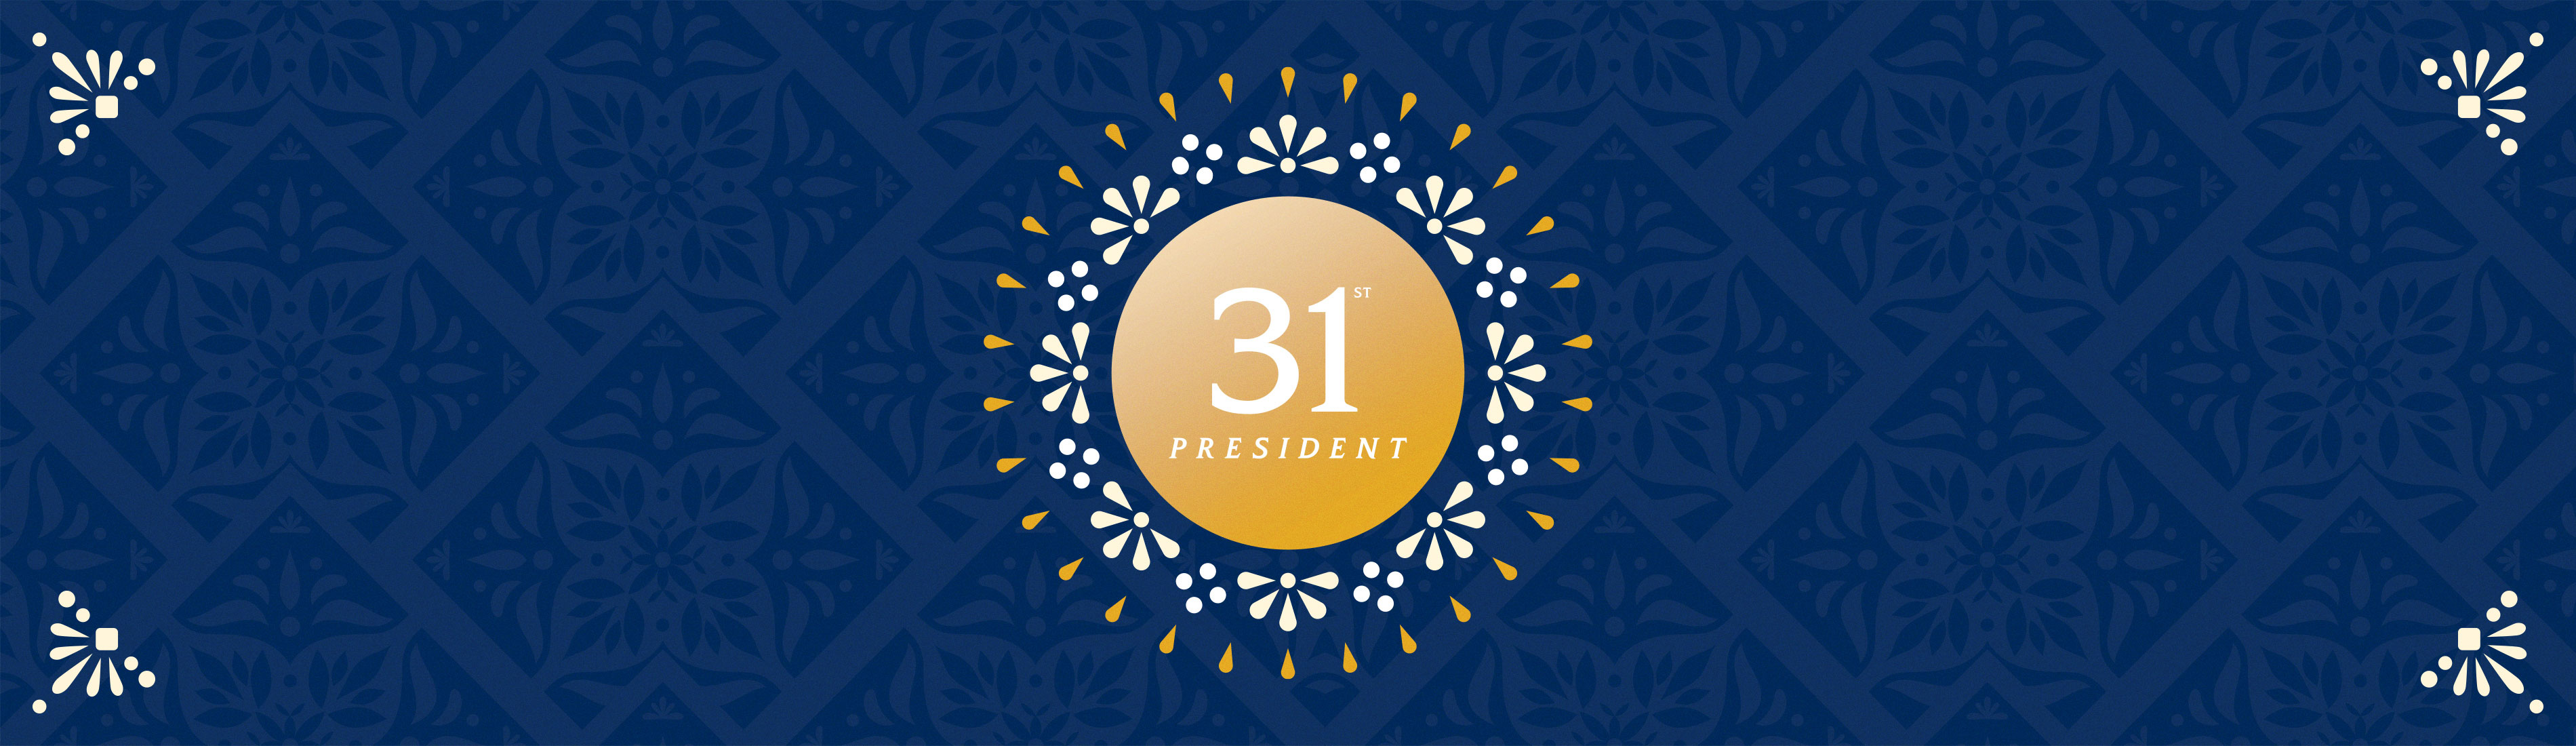 31st President in a ornamental gold sunburst circle over a dark blue pattern that is typical in Mexican textile work.